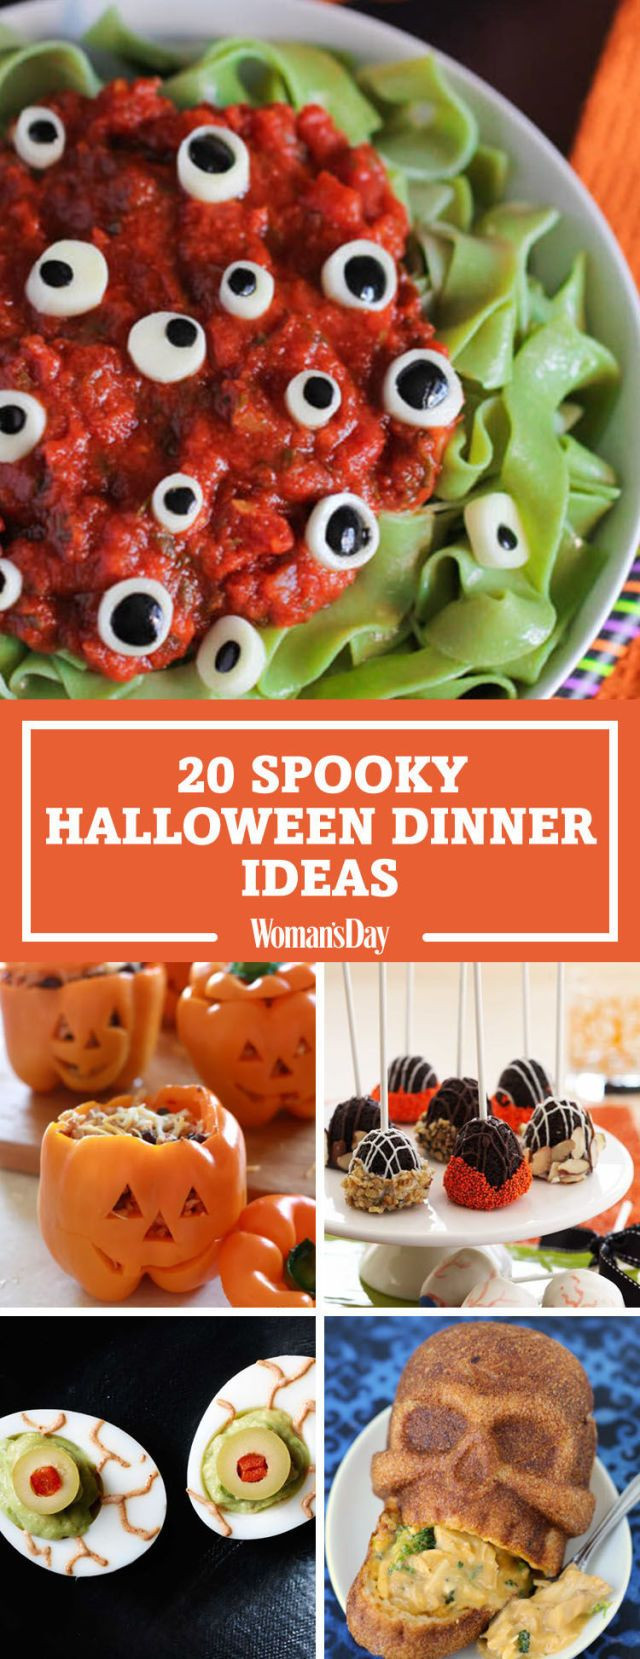 Easy Halloween Party Food Ideas For Adults
 40 Halloween Dinner Ideas That Are So Good It s Scary